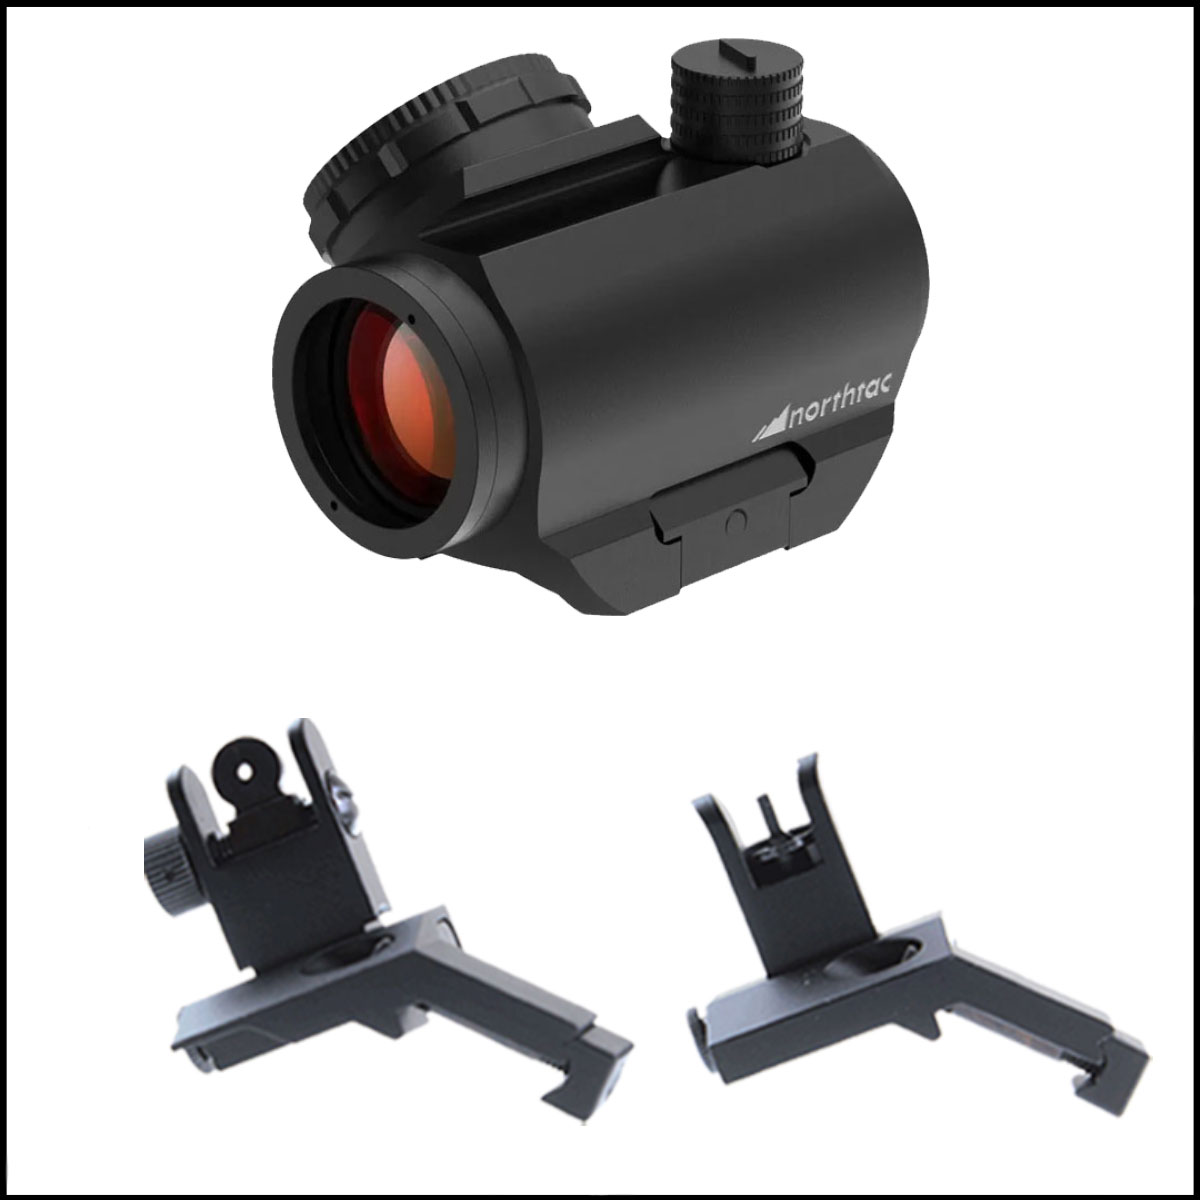 Sights and Optic Combo: FLX01 Red Dot Sight Red Dot + US Tactical 45 Degree Offset Spring Loaded Flip-Up Sight Set